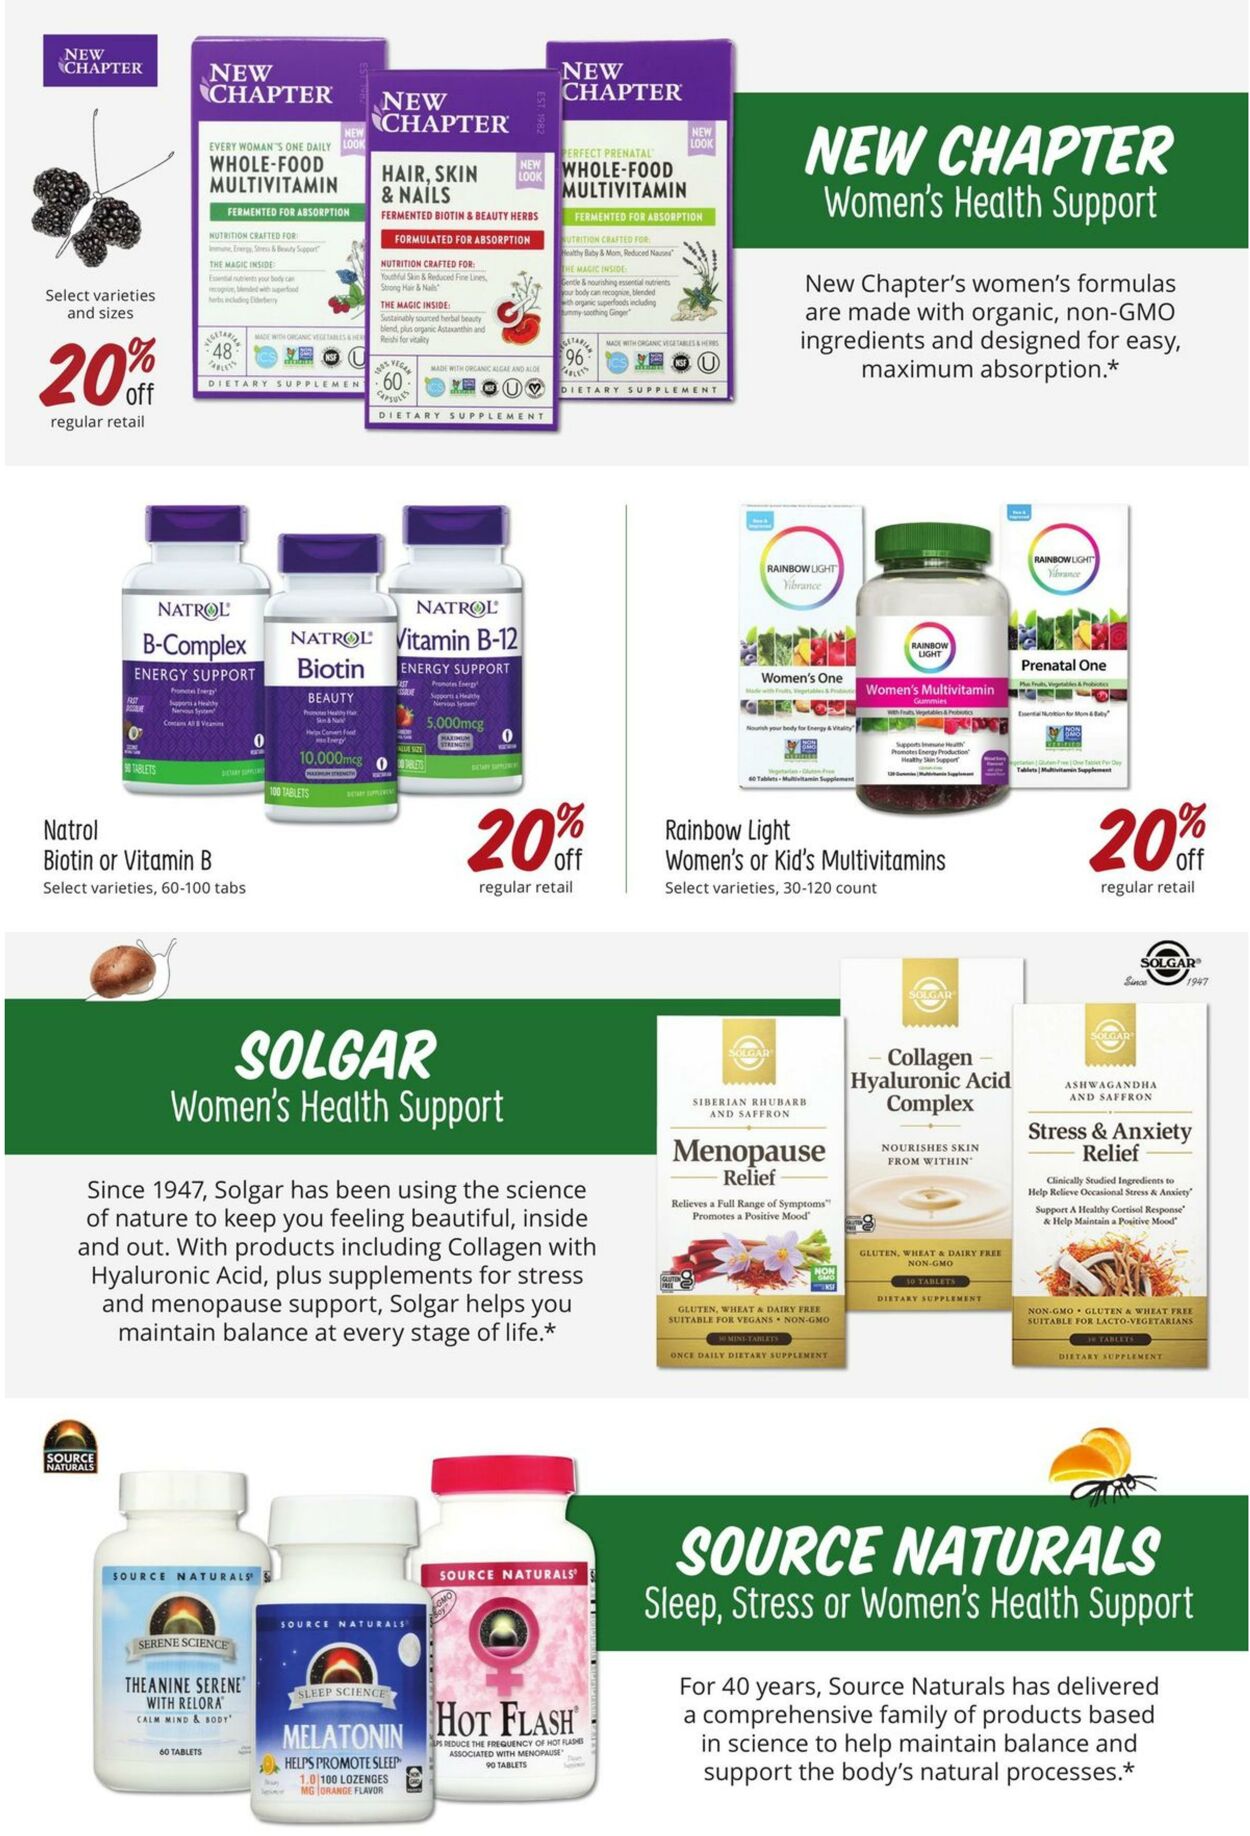 Weekly ad Sprouts 04/27/2022 - 05/31/2022